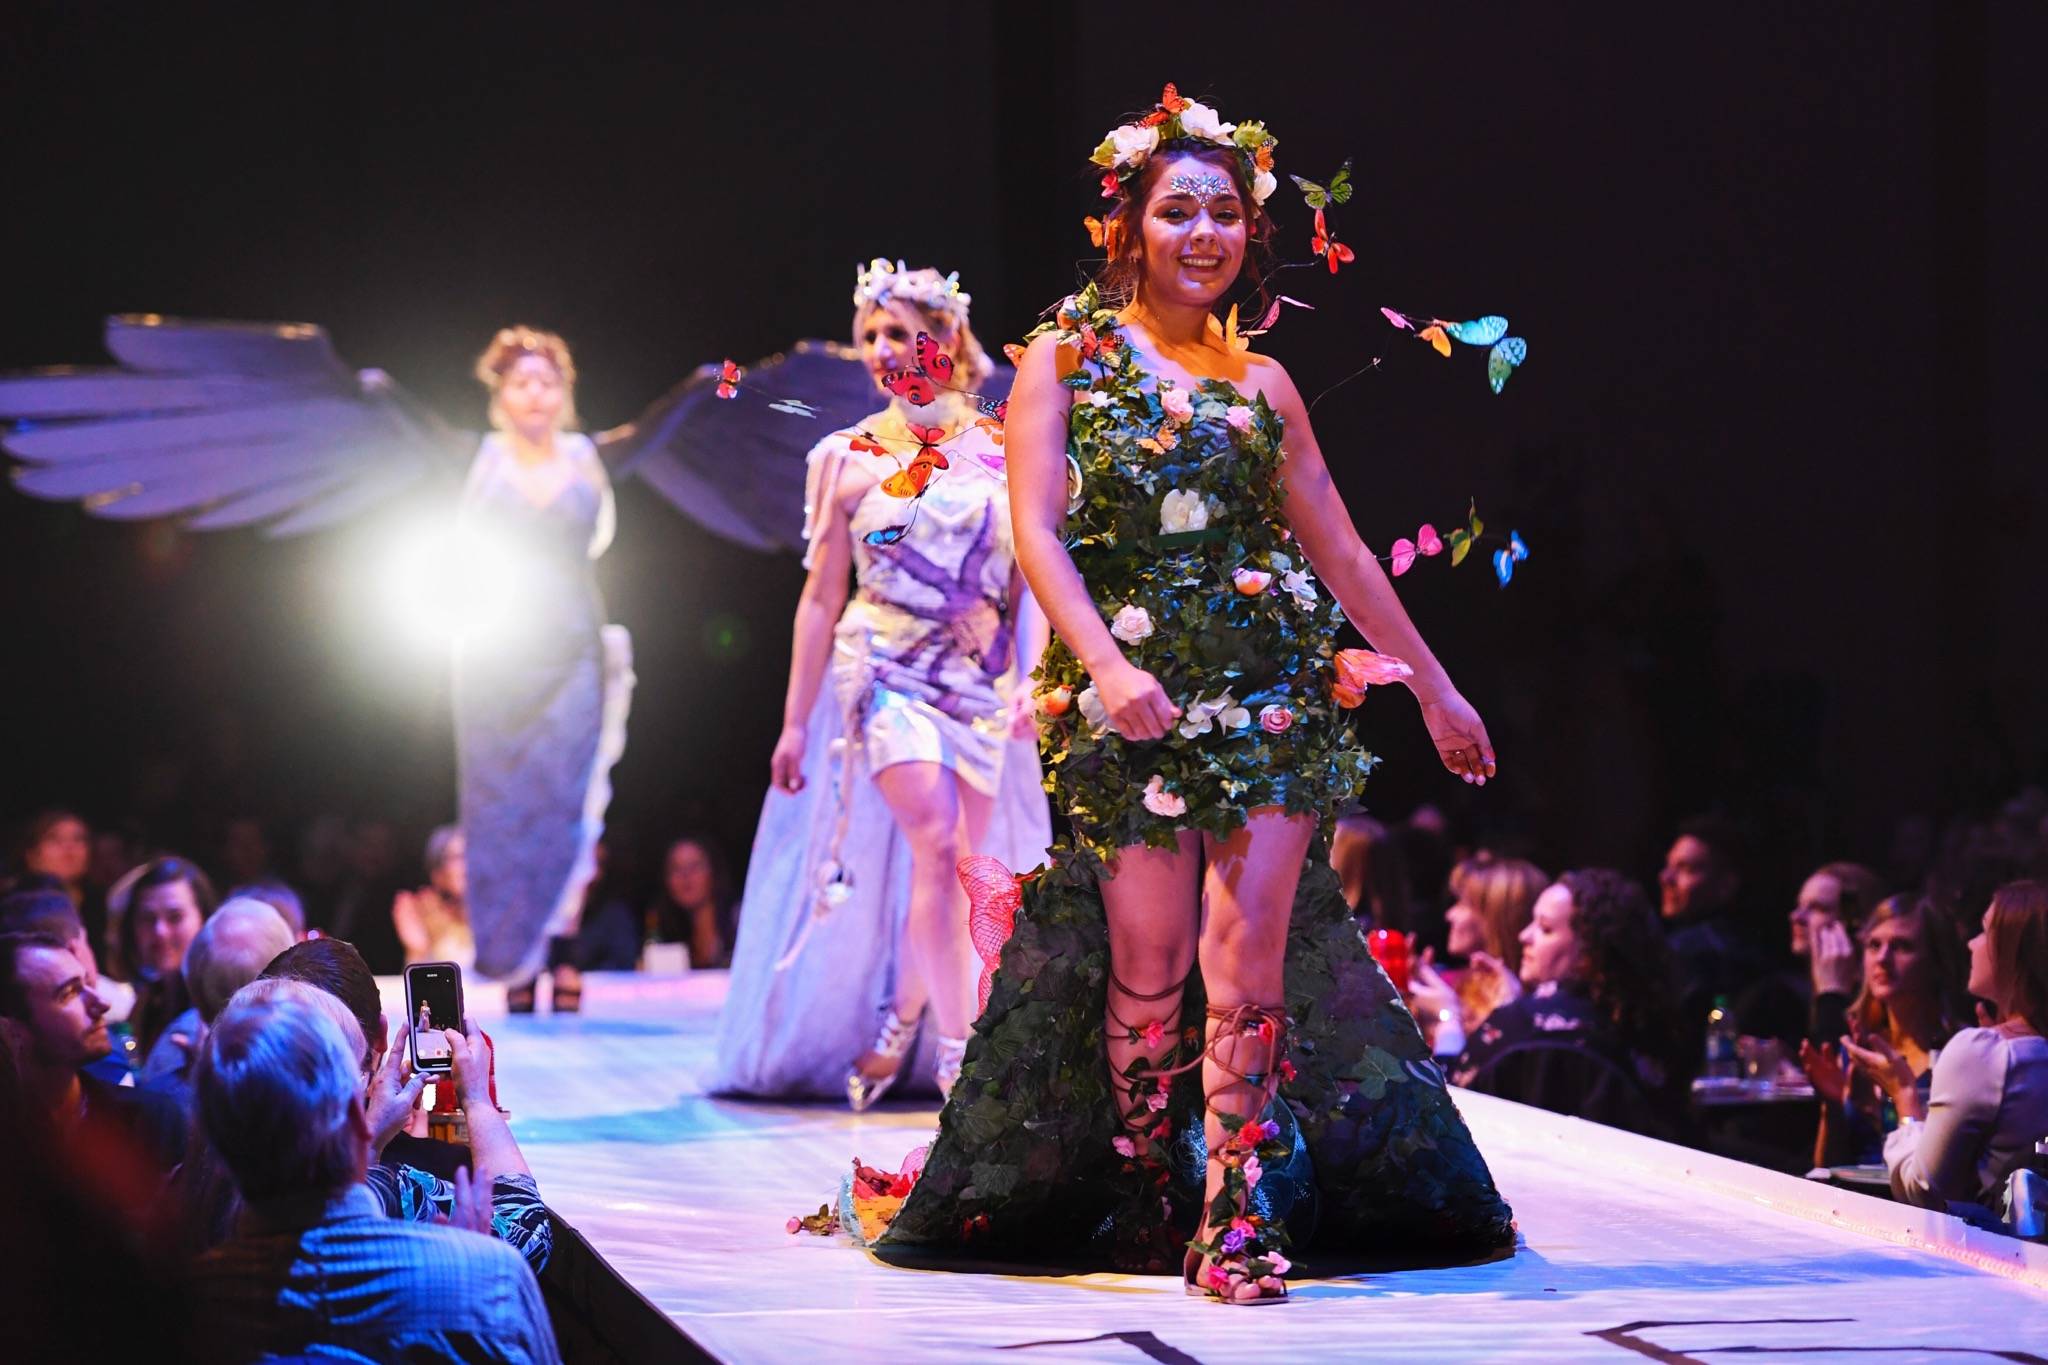 Maleny Villagomez, Samantha Harrison and Tesa Castillo work the runway with the piece “Protect What is Sacred” at the Wearable Art show at Centennial Hall on Saturday, Feb. 16, 2019. The artists are Paty Villagomez and Glo Ramirez. (Michael Penn | Capital City Weekly)